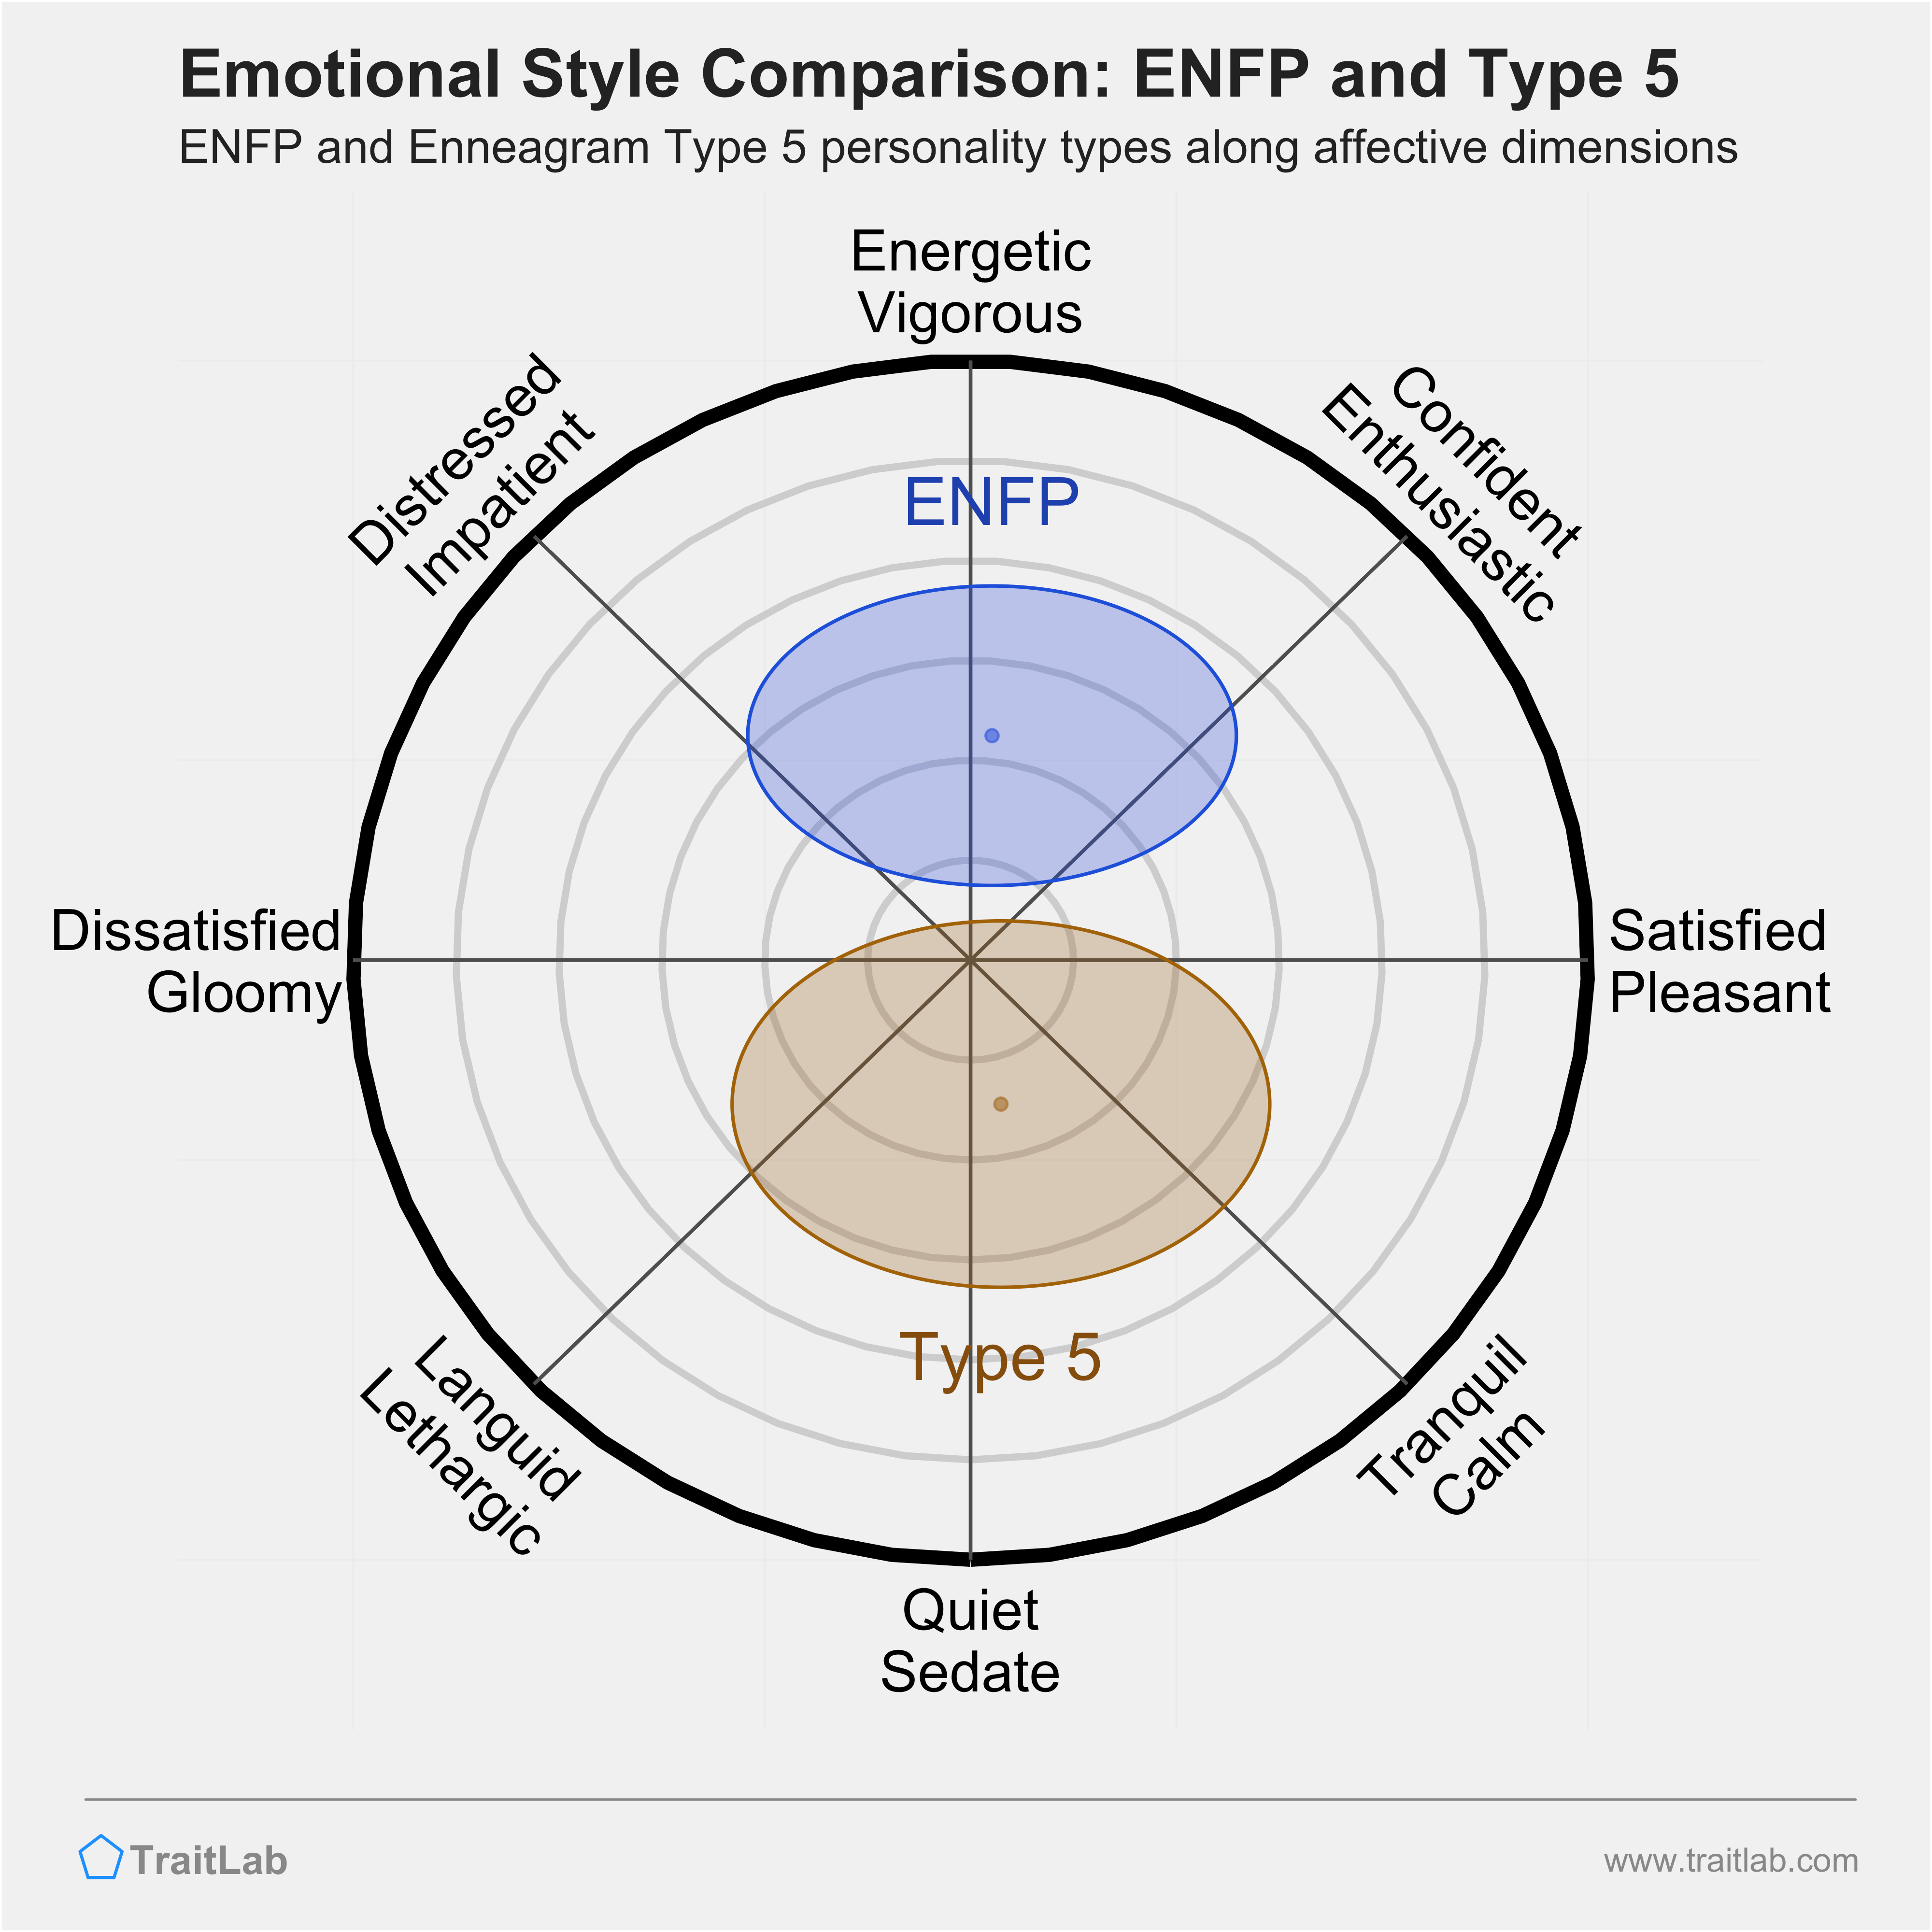 ENFP and Type 5 comparison across emotional (affective) dimensions